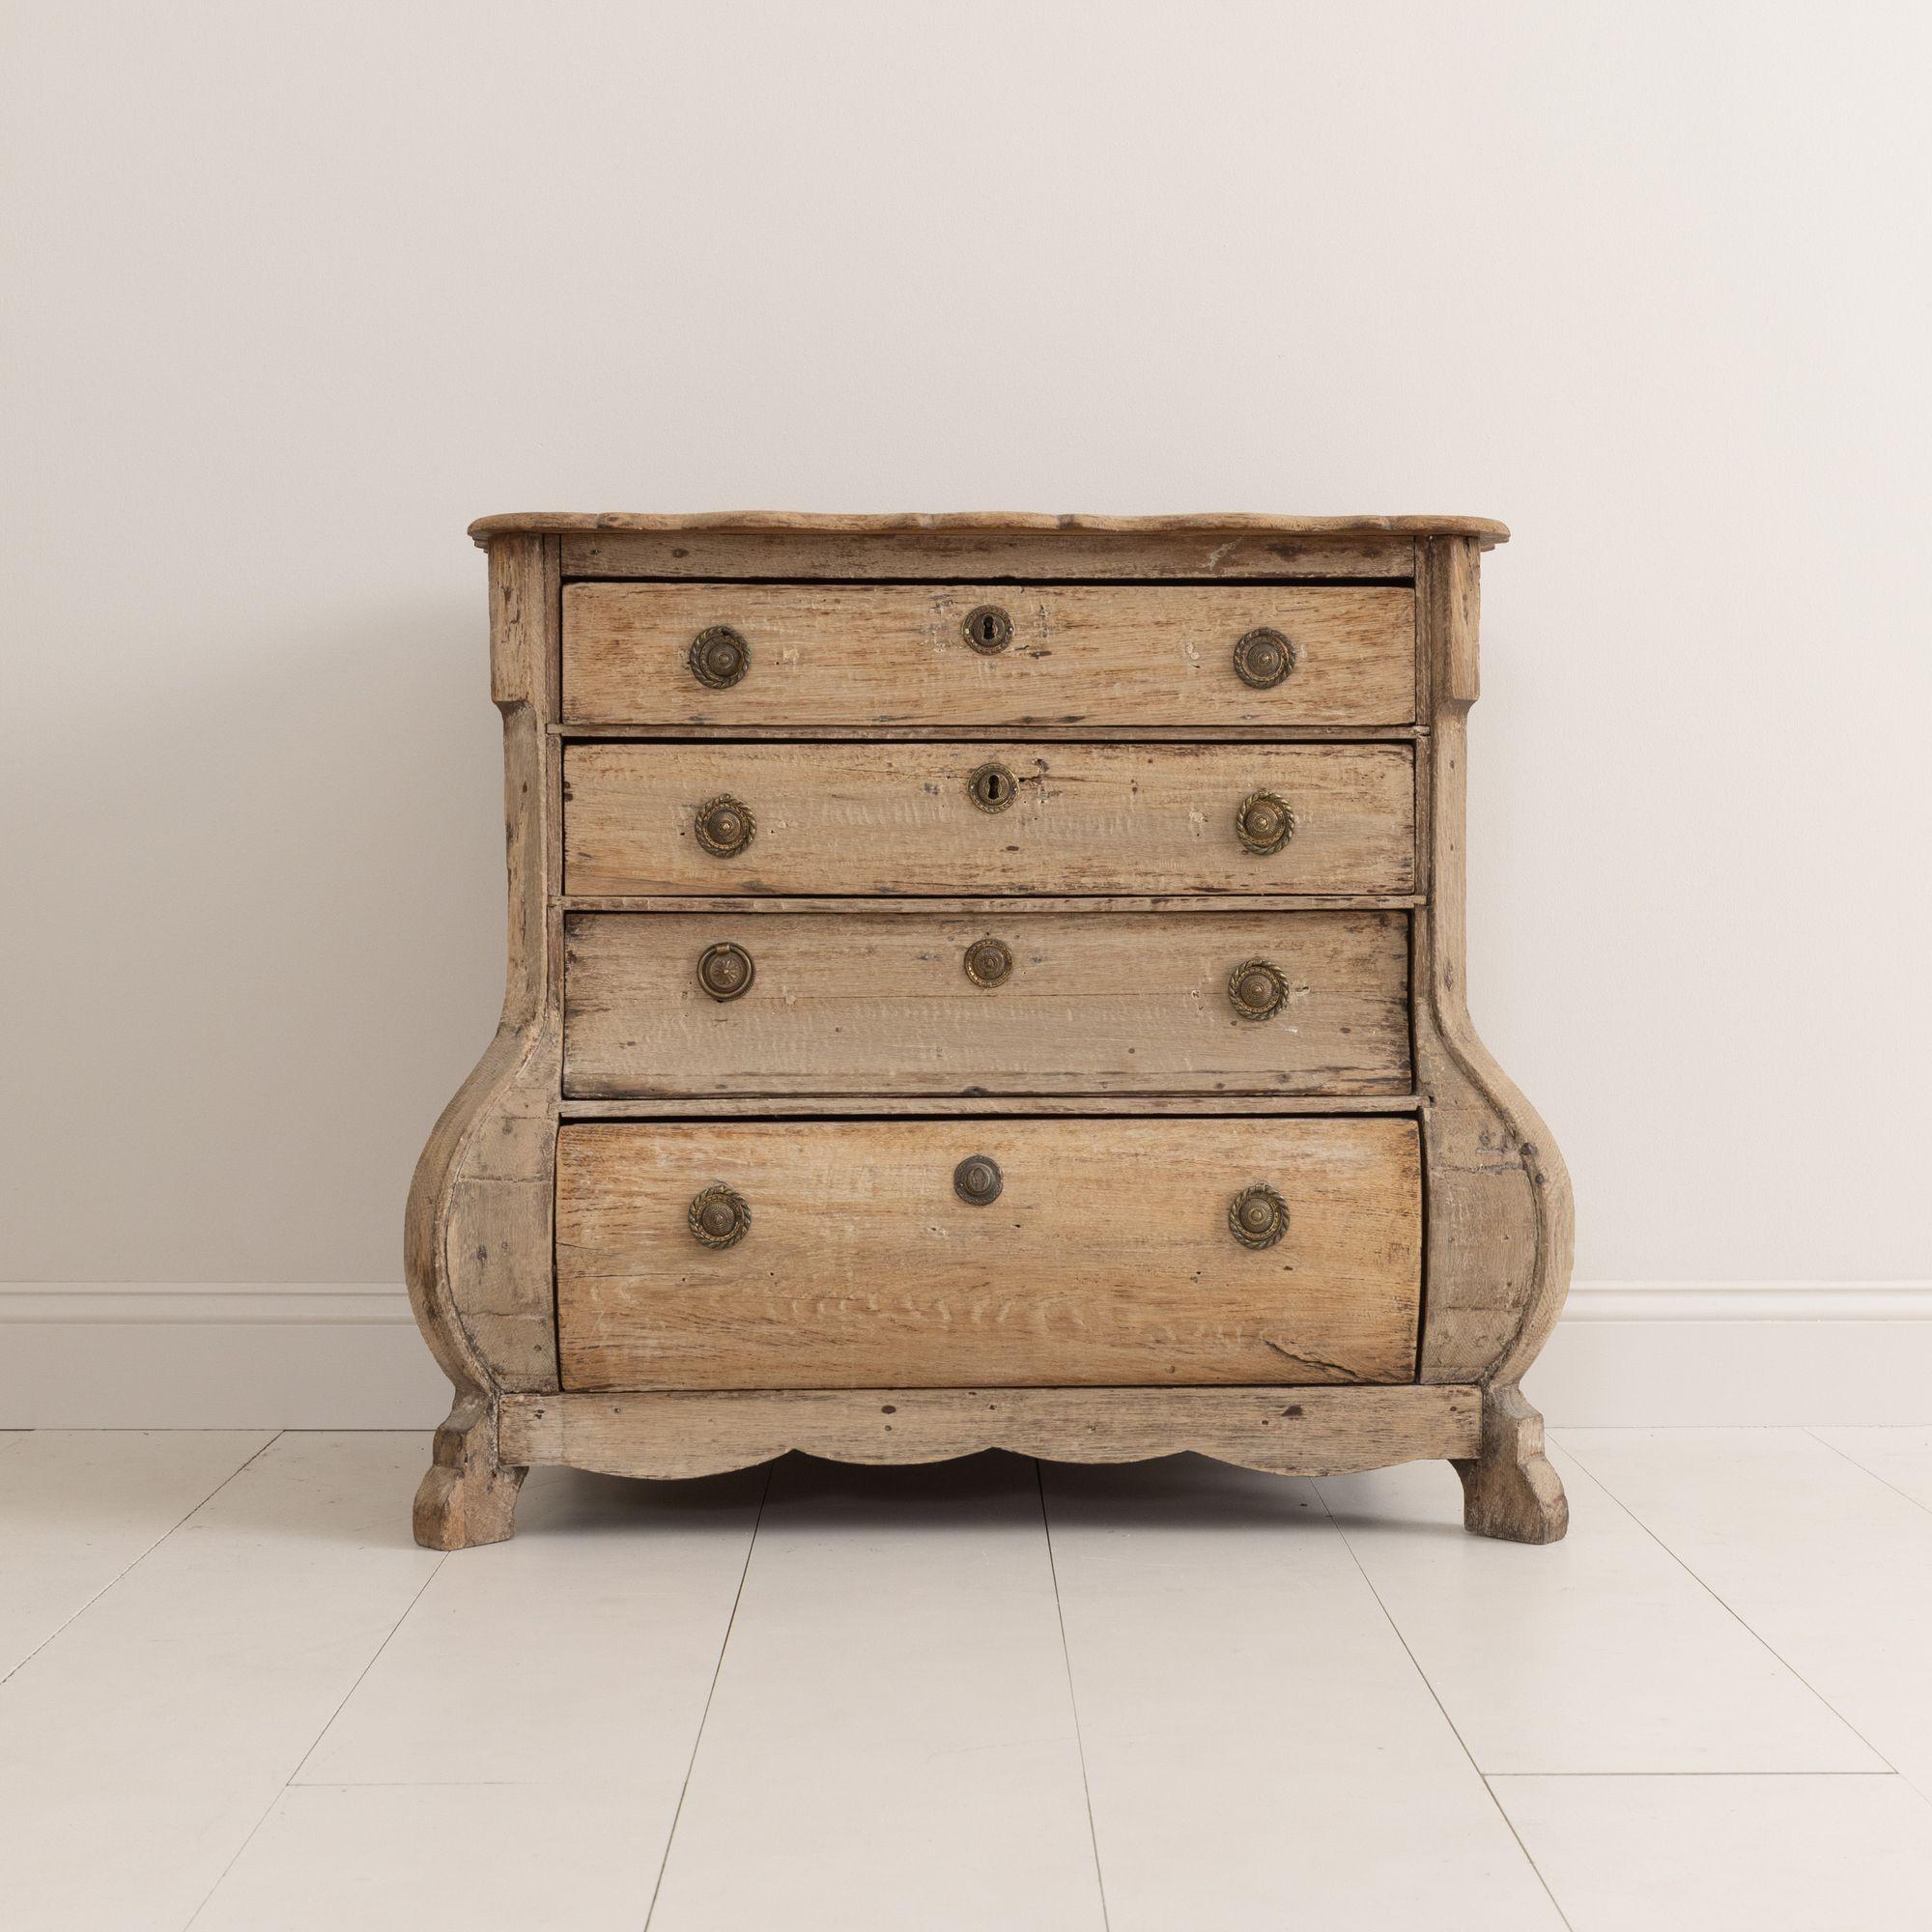 A Dutch Rococo commode from the 19th century in original patina with Bombay shape and scalloped top.